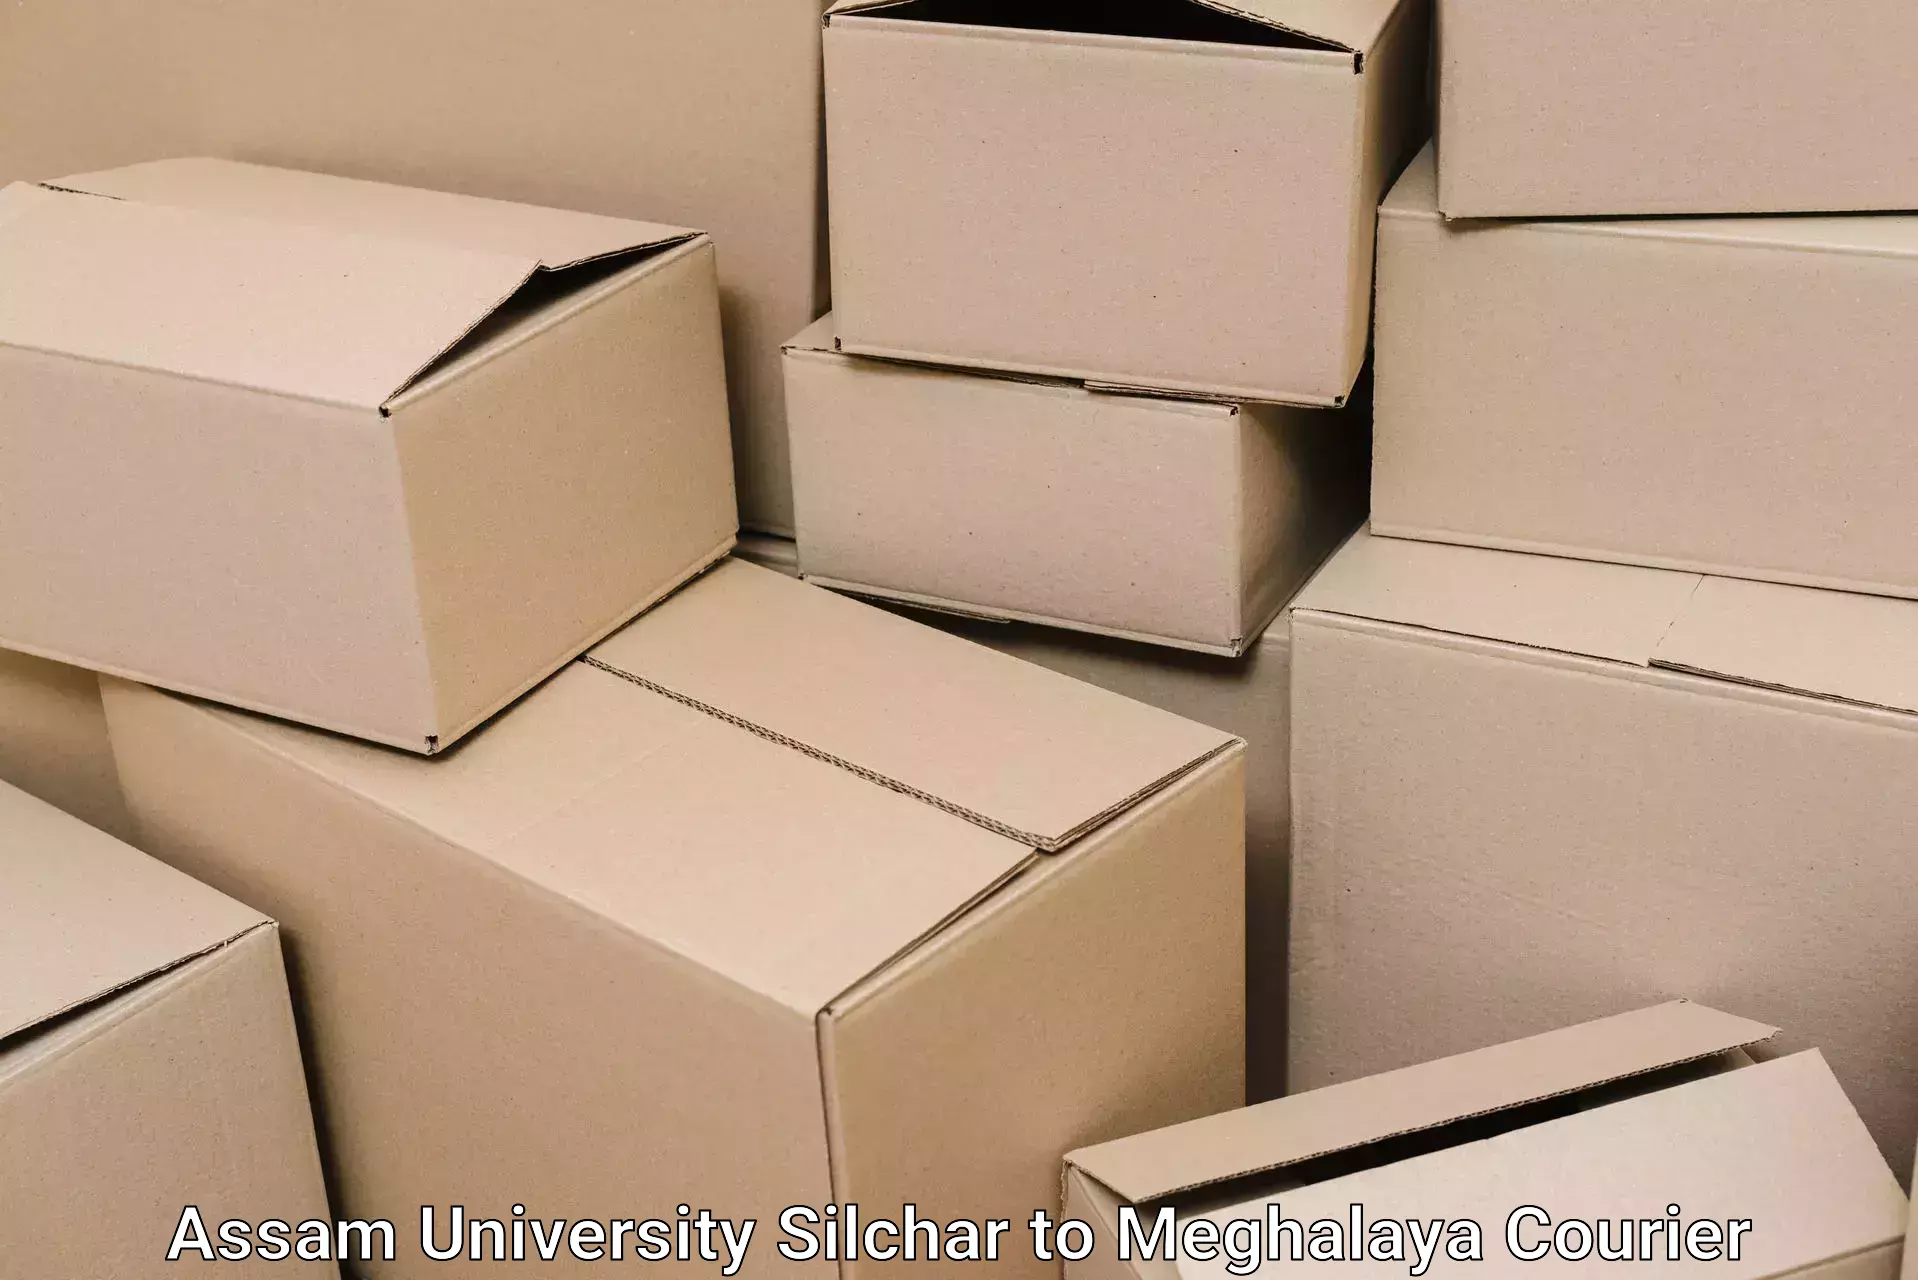 Efficient relocation services in Assam University Silchar to North Eastern Hill University Shillong